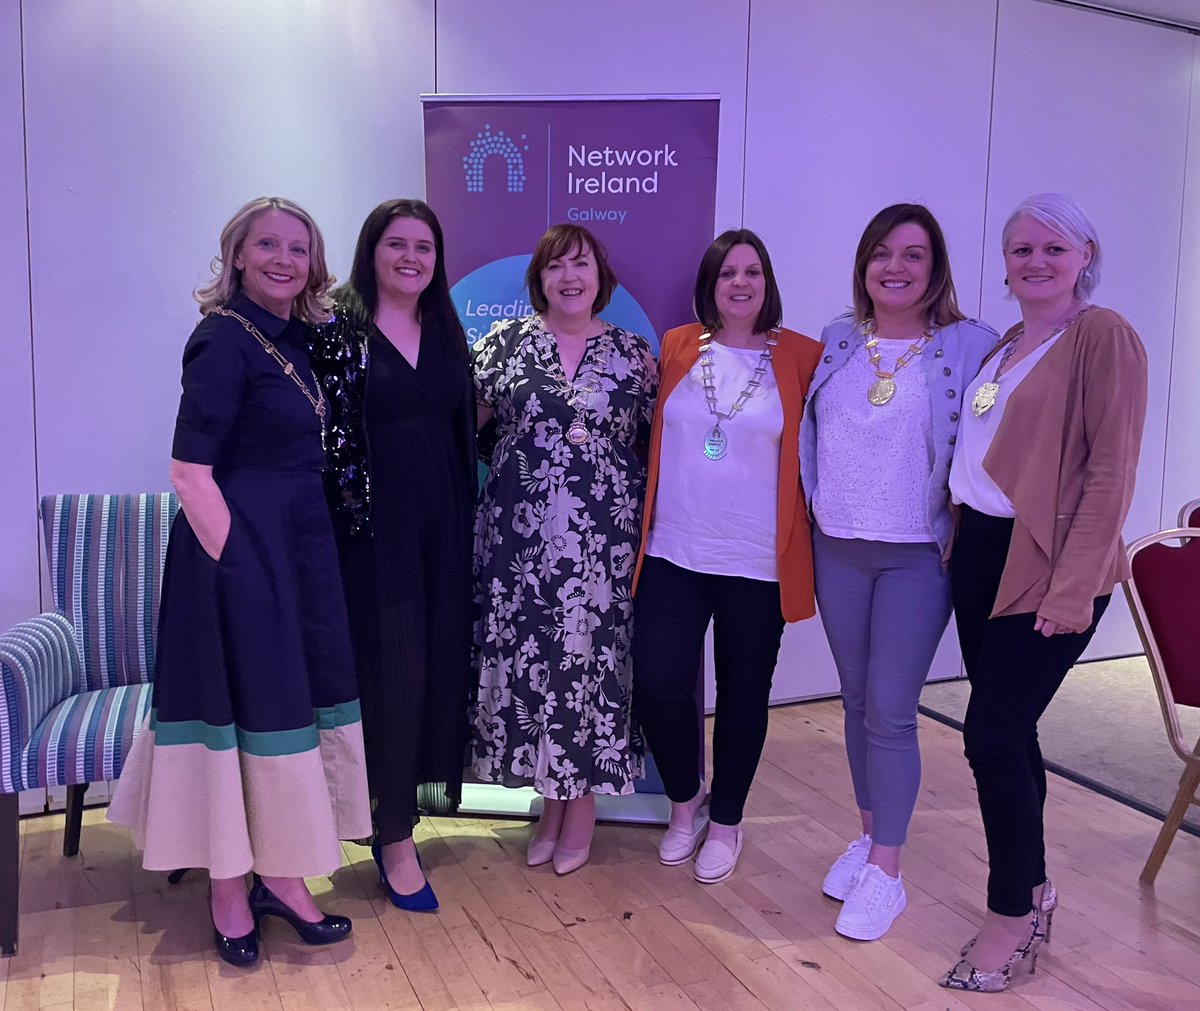 Flying the flag for @NetIrlWaterford @networkwaterford with Sinead O'Neill. When women support each other, incredible things happen. Inspiring two days in #Galway @networkgalway President's Dinner 2024 and @Network_Ireland National Executive meeting.

#supportedbyAlB #stepahead